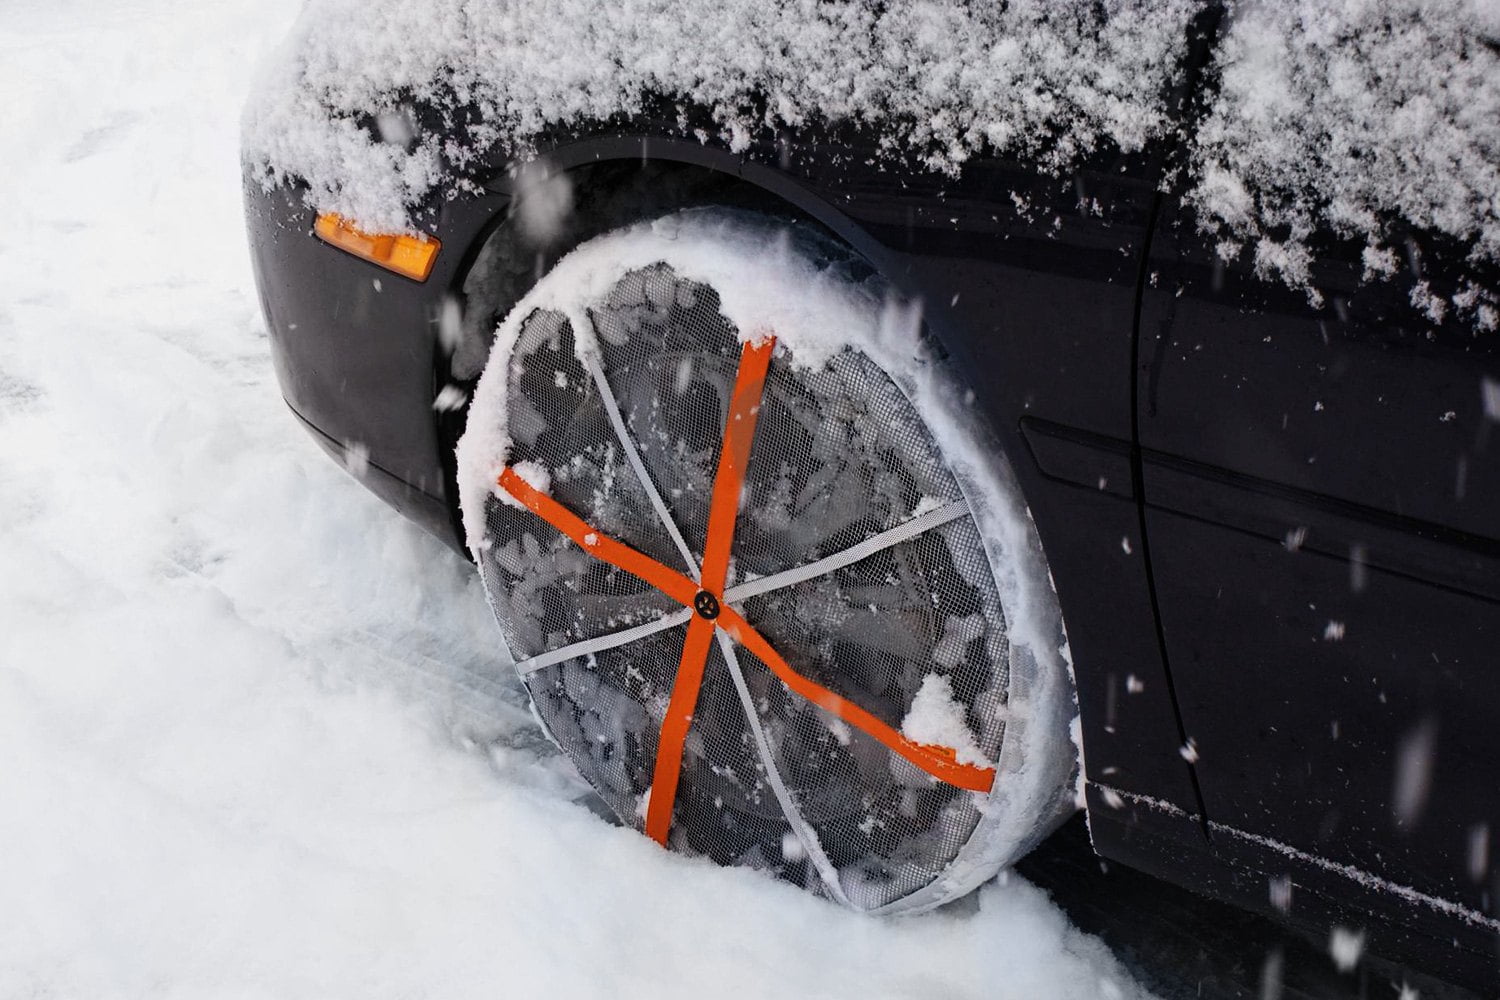 AUTOSOCK HD AL74 Traction Wheel and Tire Cover for Ice & Snow Easy Install Tire Chain Alternative with Emergency Safety Flare 